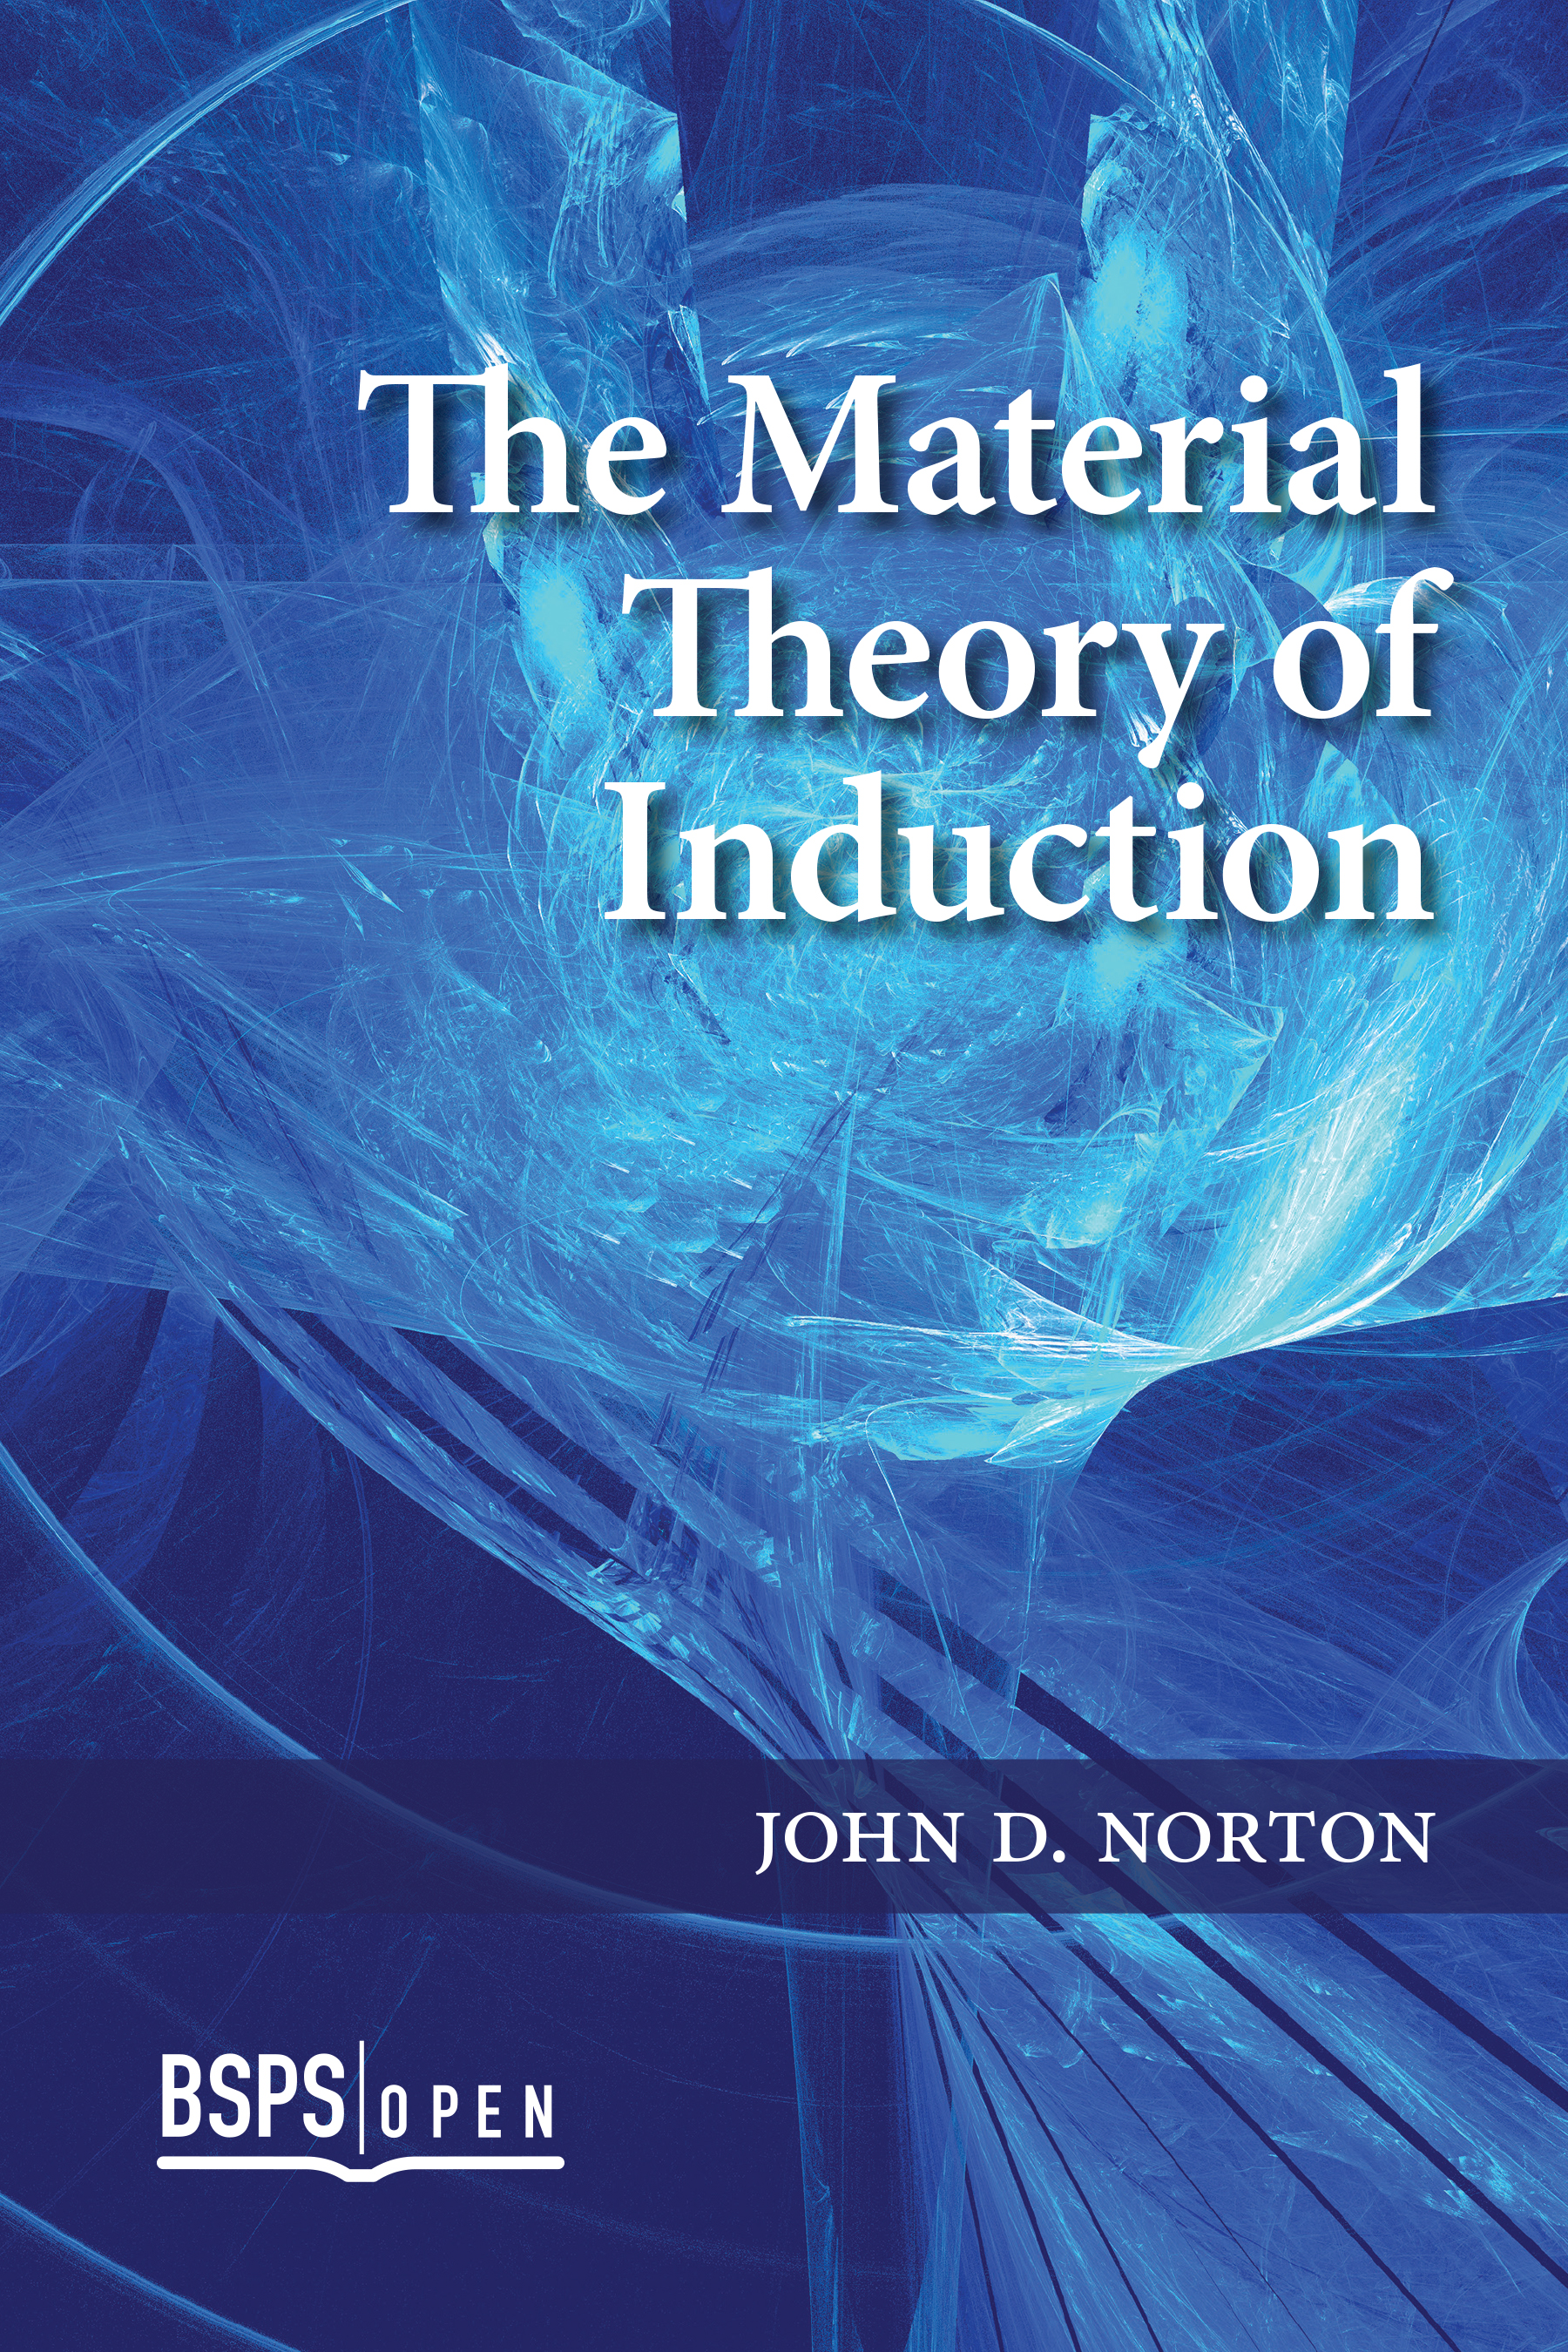 Cover Image for: Material Theory of Induction